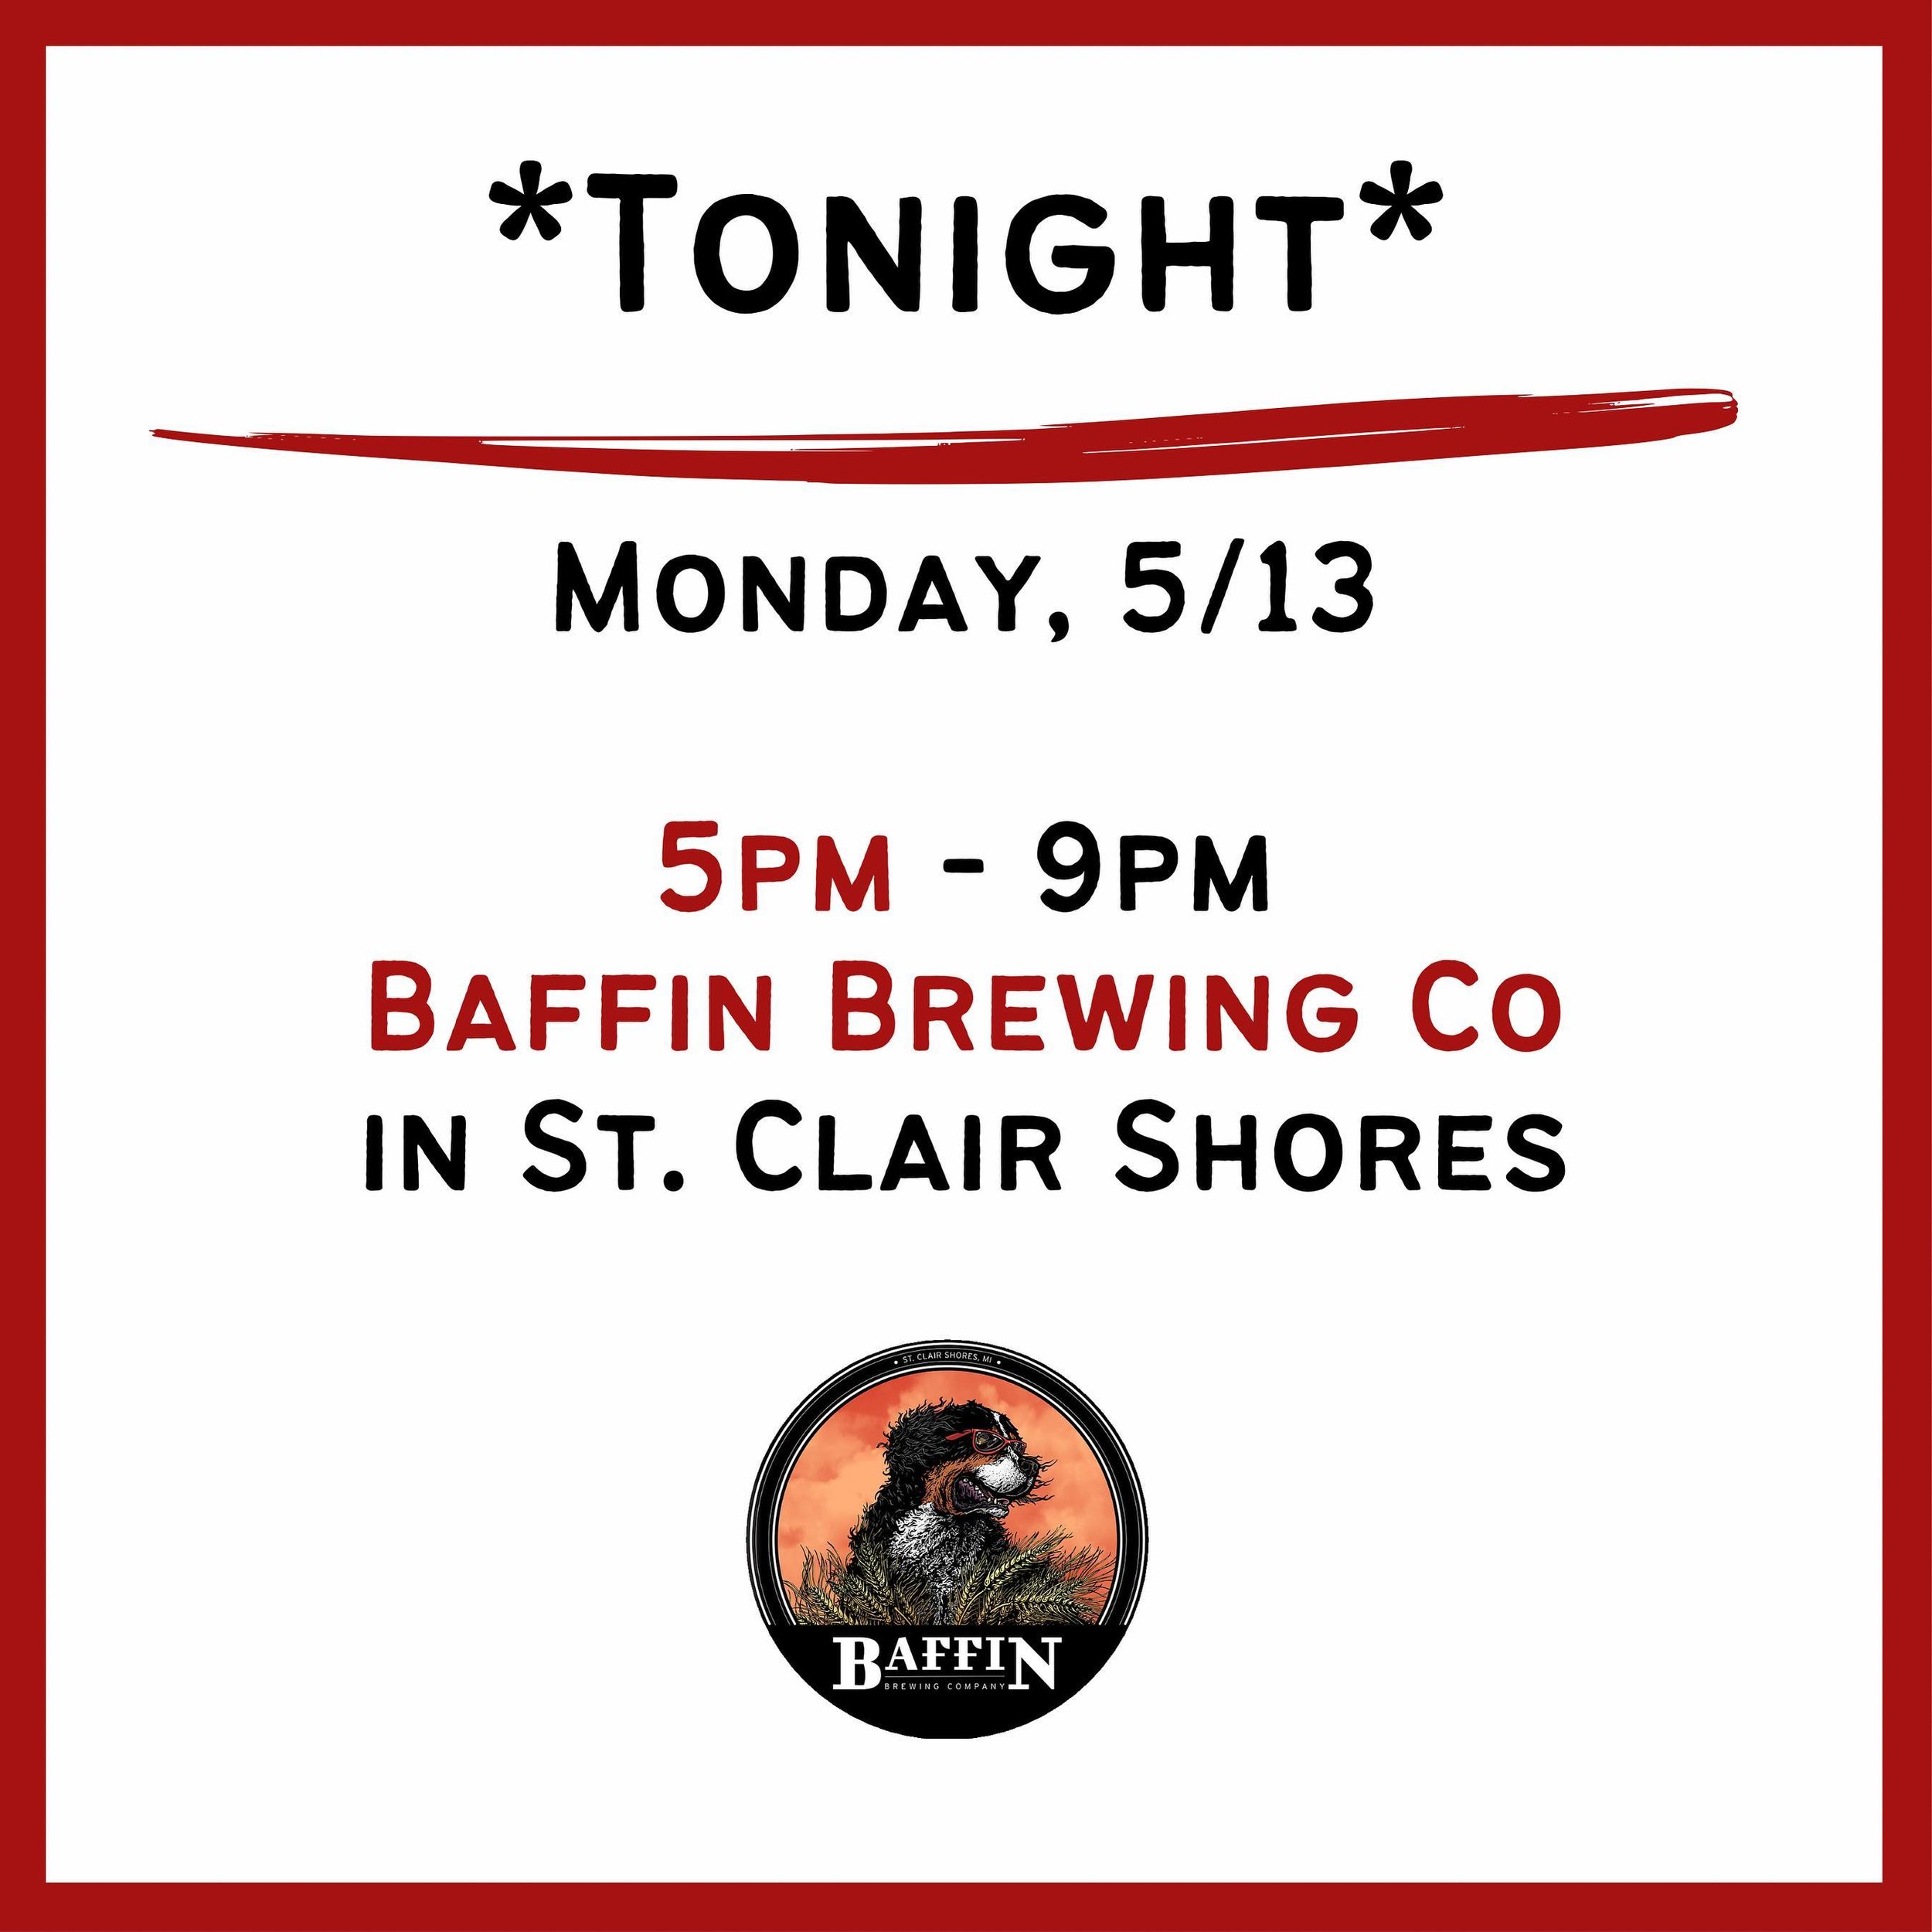 We JUST picked up @baffinbrewingco for tonight- hope to see you there! It&rsquo;s a beautiful day to be out and about! #scs @downtownscs_ #baffin #pizzaandbeer #craftbeer #craftpizza#woodfiredpizza